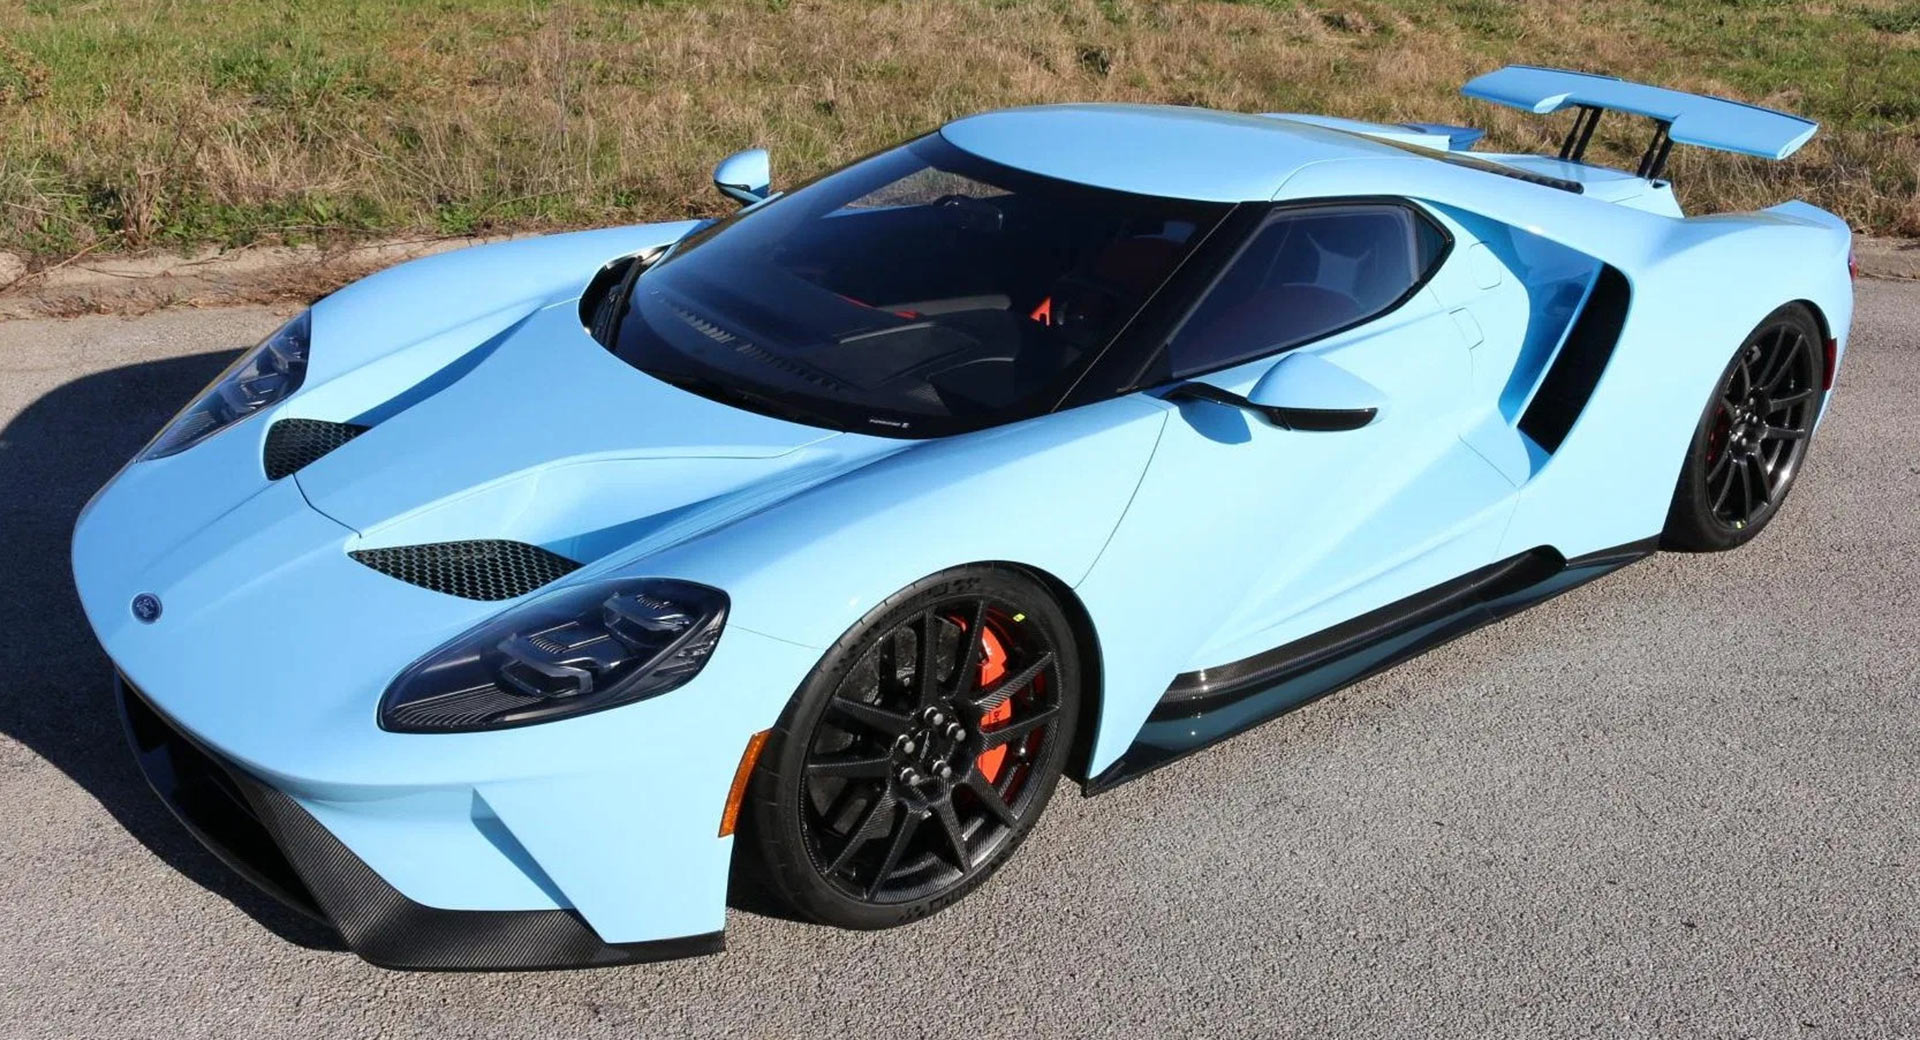 Light 2018 Ford GT Has Already Attracted Bids 40% Over Sticker Price | Carscoops